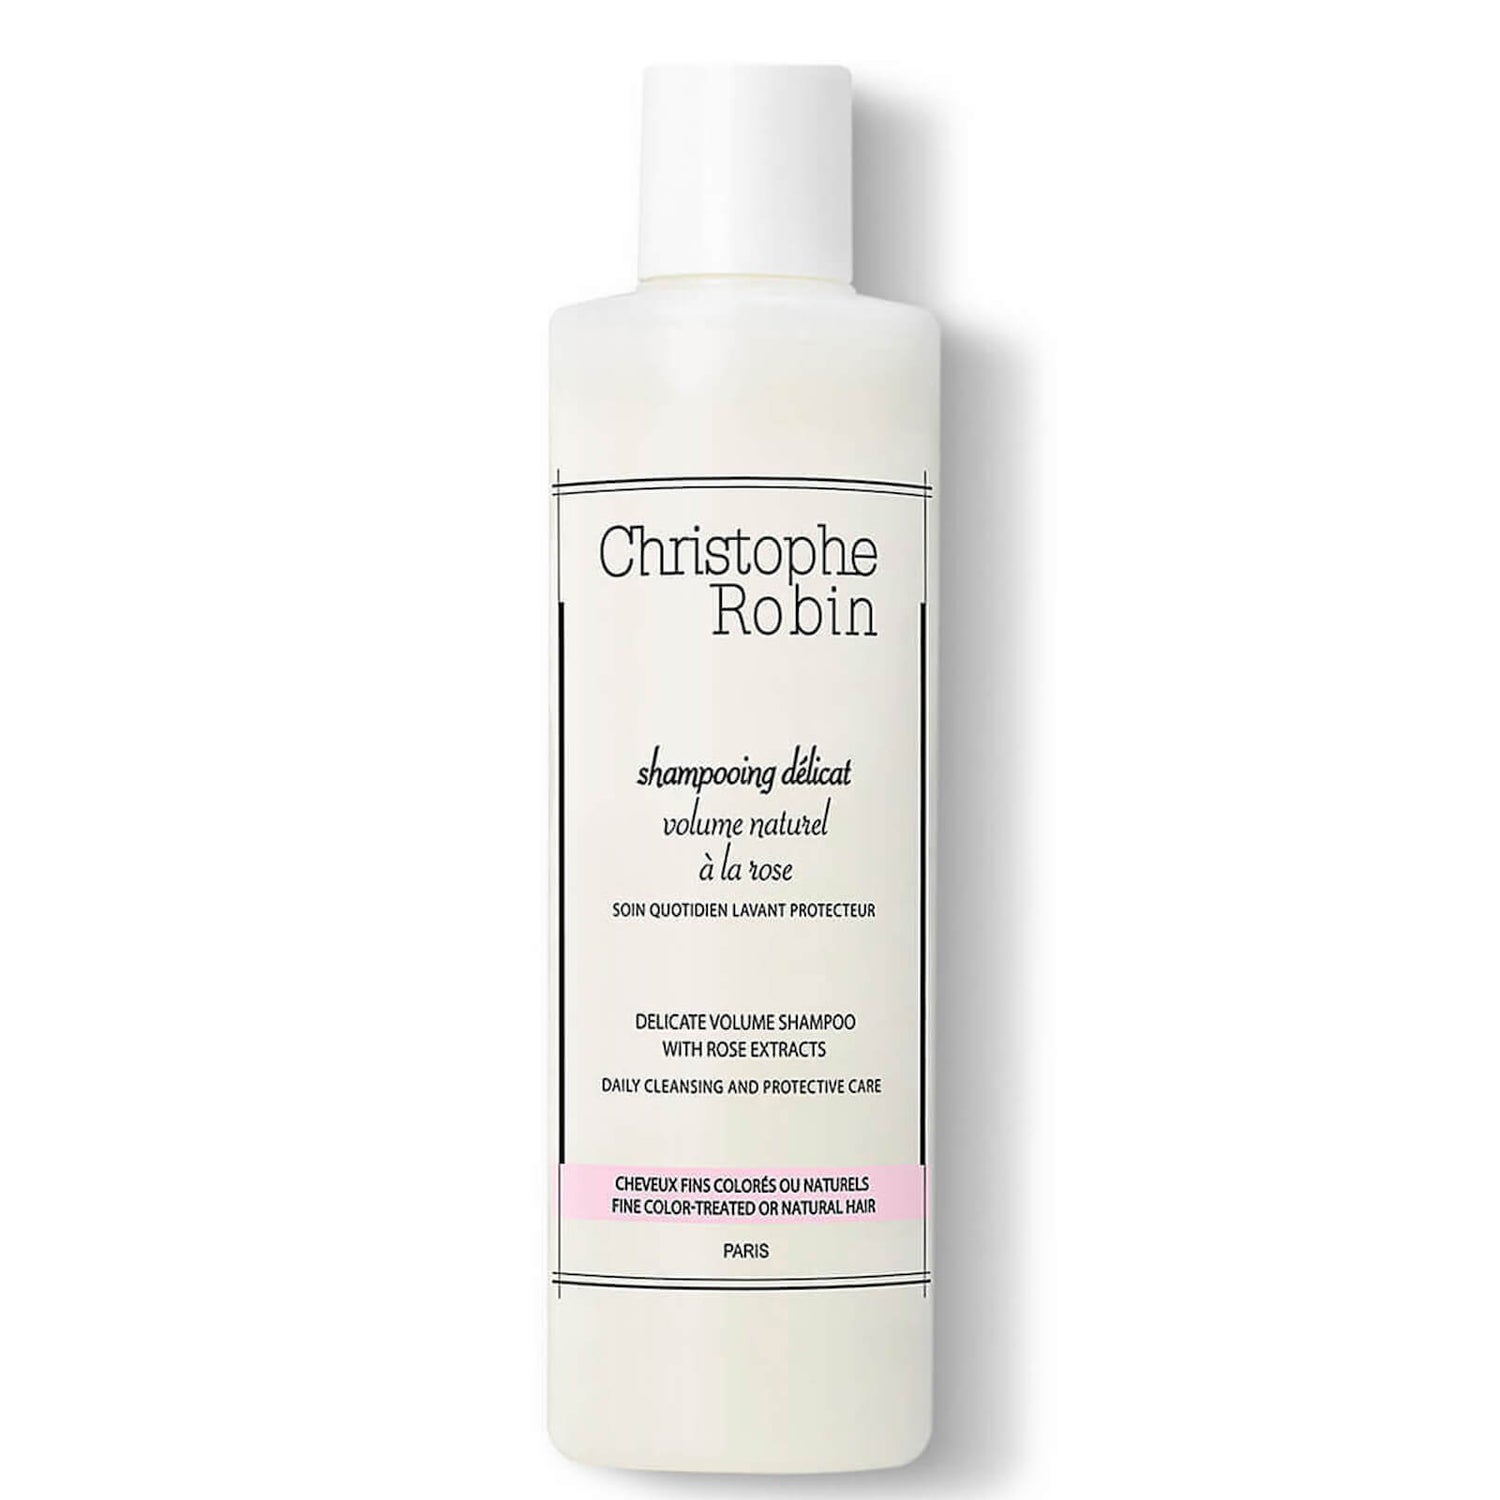 Christophe Robin Delicate Volumizing Shampoo with Rose Extracts (8.33 fl. oz.)